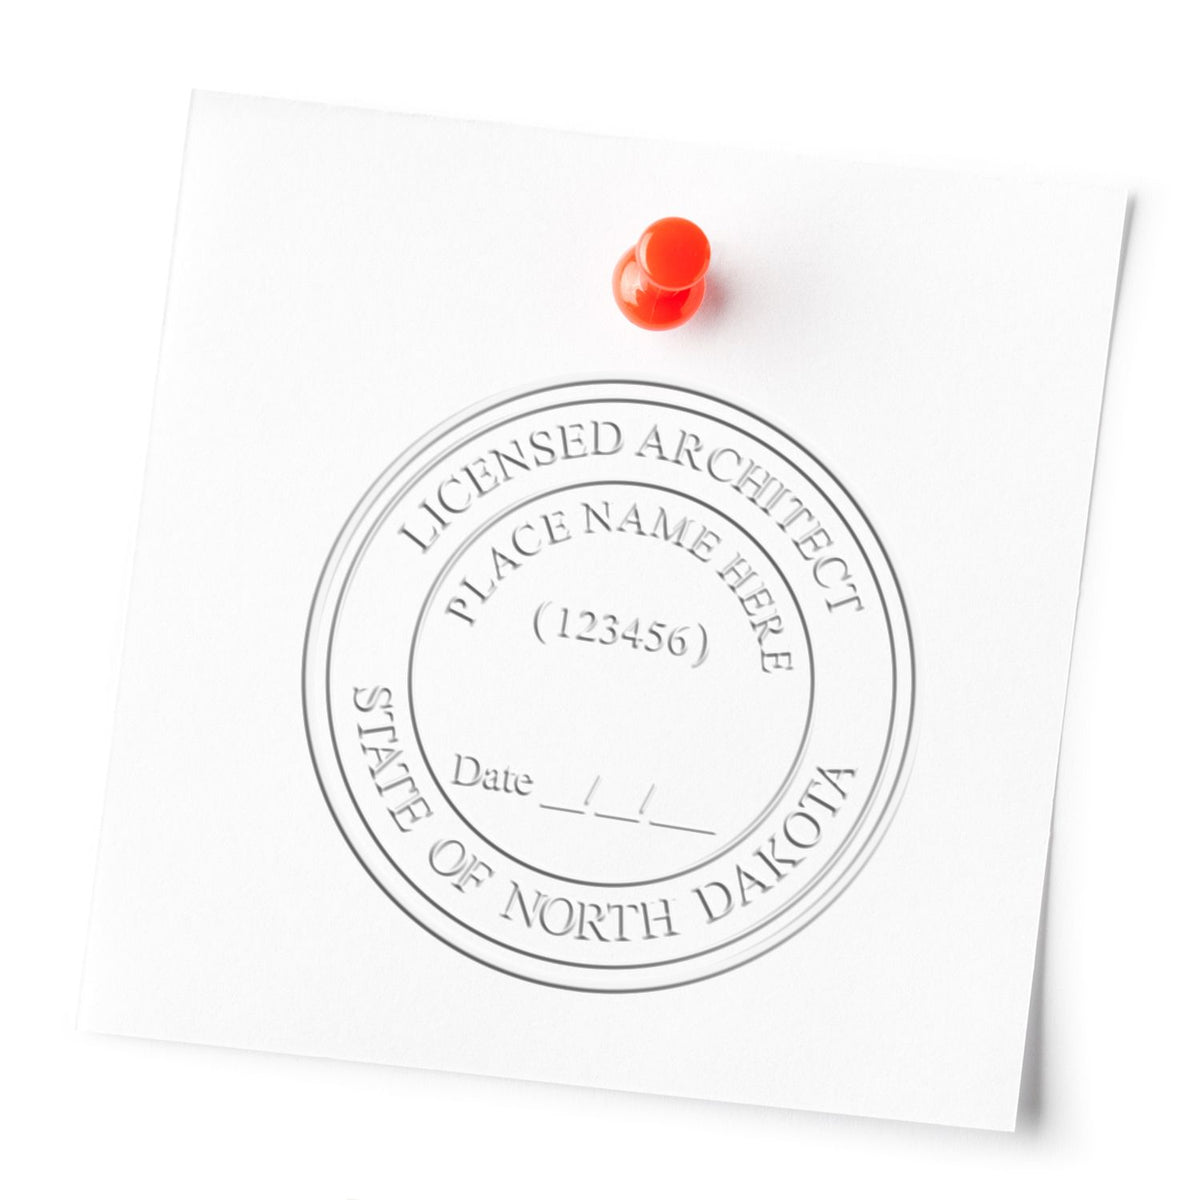 An alternative view of the Hybrid North Dakota Architect Seal stamped on a sheet of paper showing the image in use